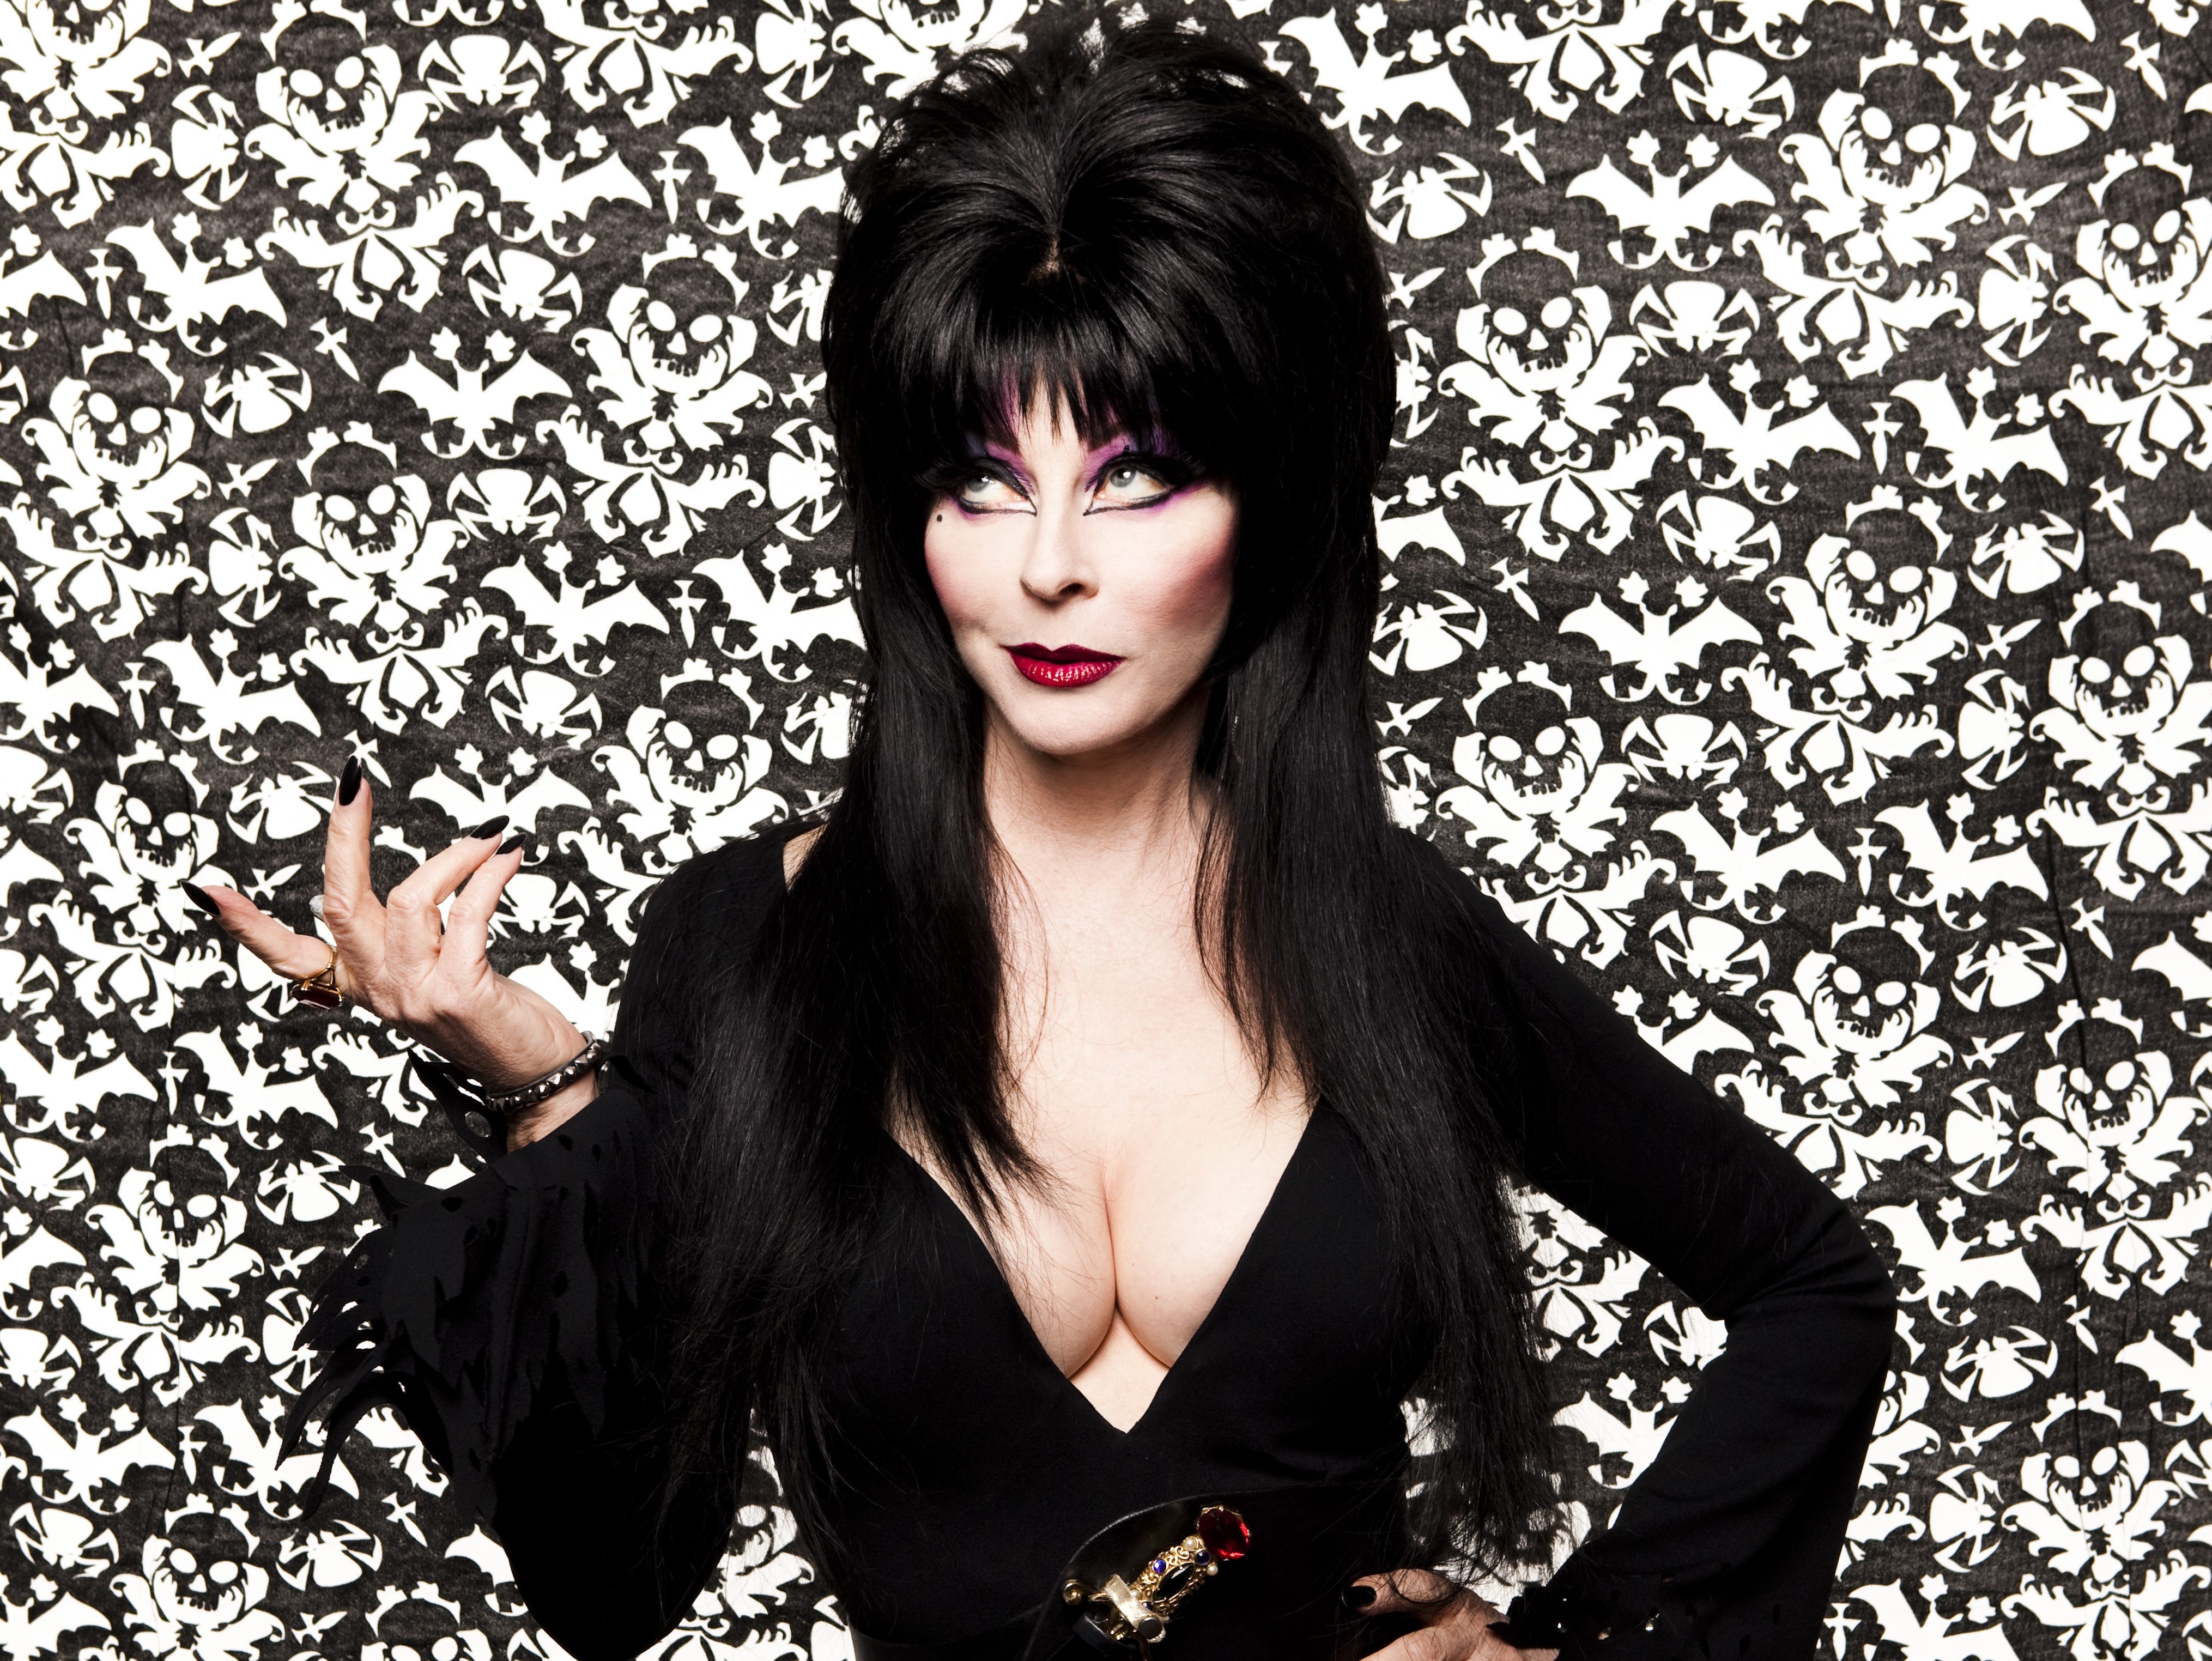 aaron cann recommends show me pictures of elvira pic